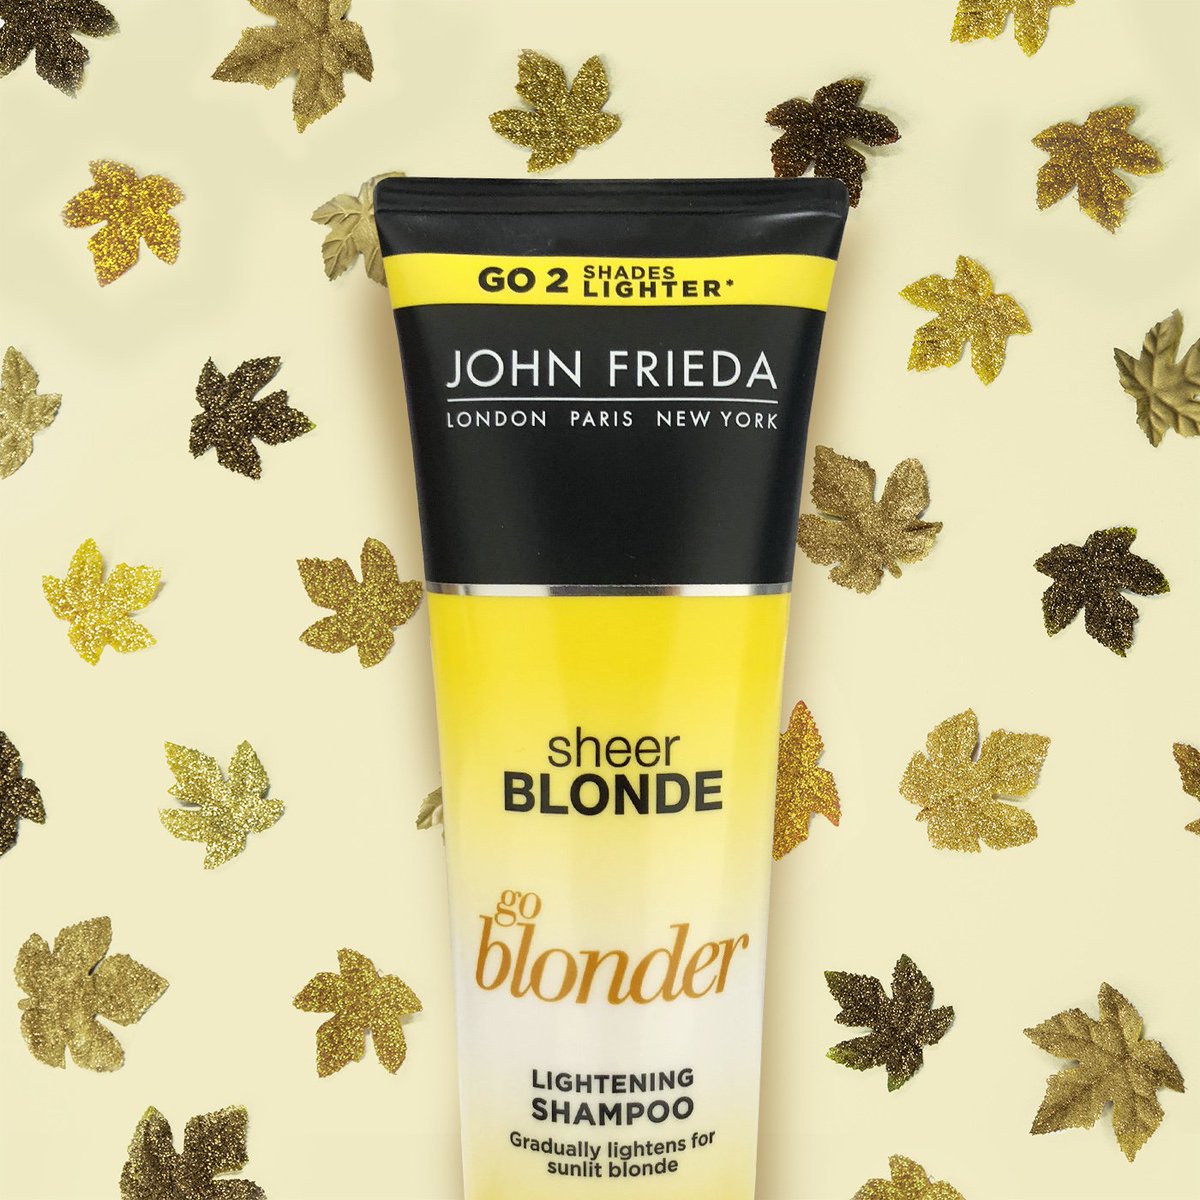 John Frieda Us On Twitter For 30 Years We Ve Made It Our Mission